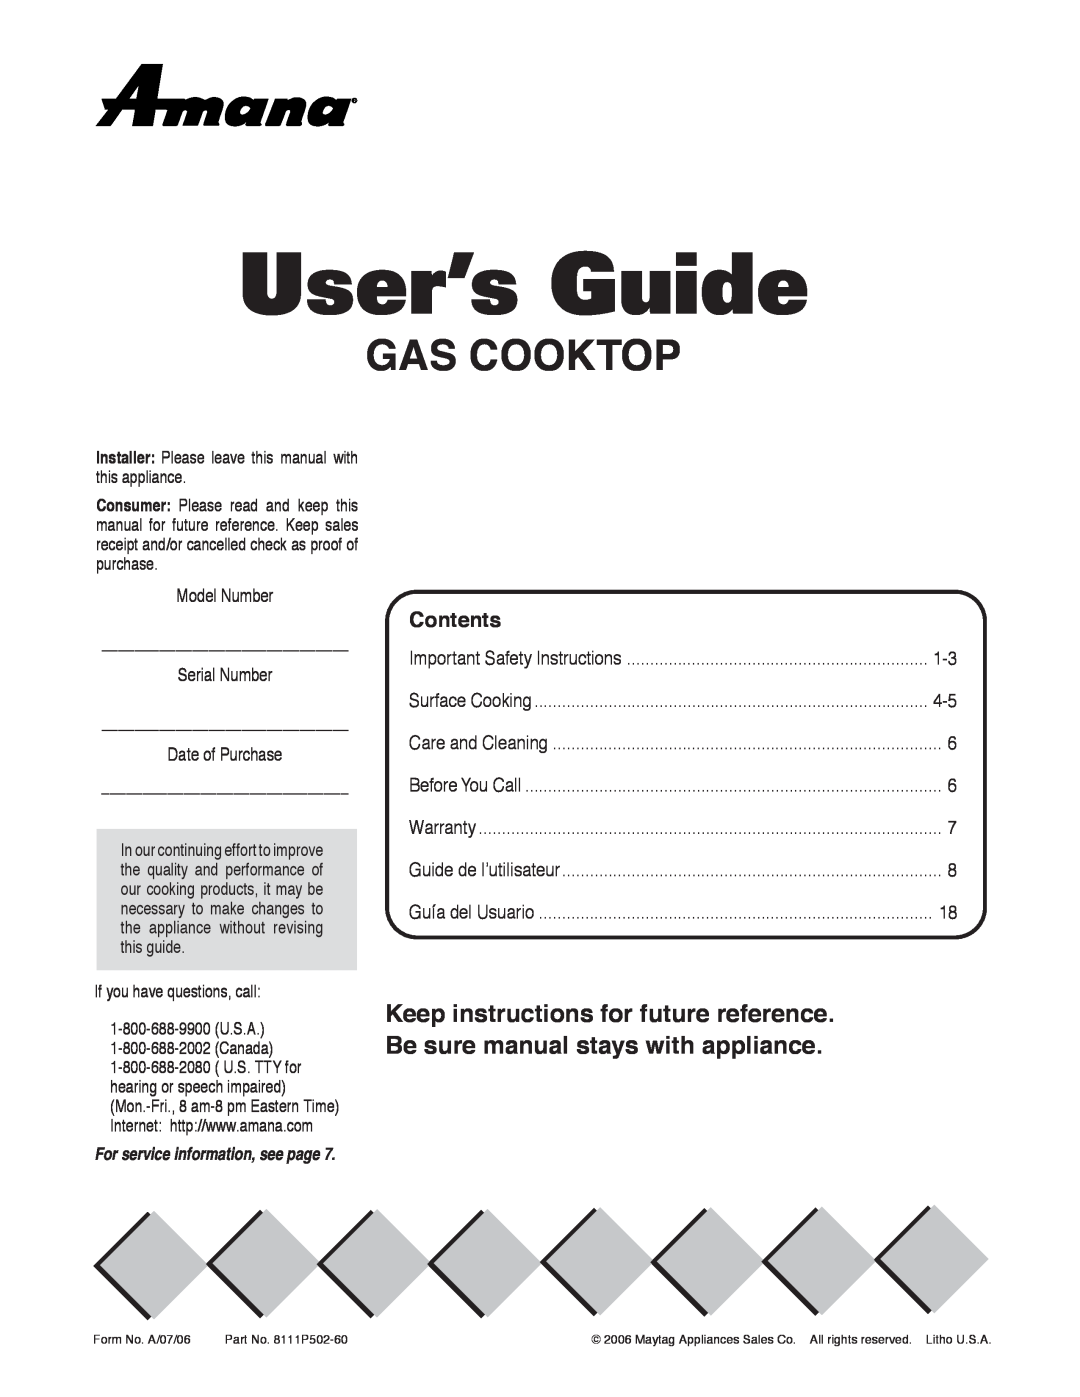 Amana AKS3040 important safety instructions User’s Guide, Gas Cooktop, Contents, For service information, see page 